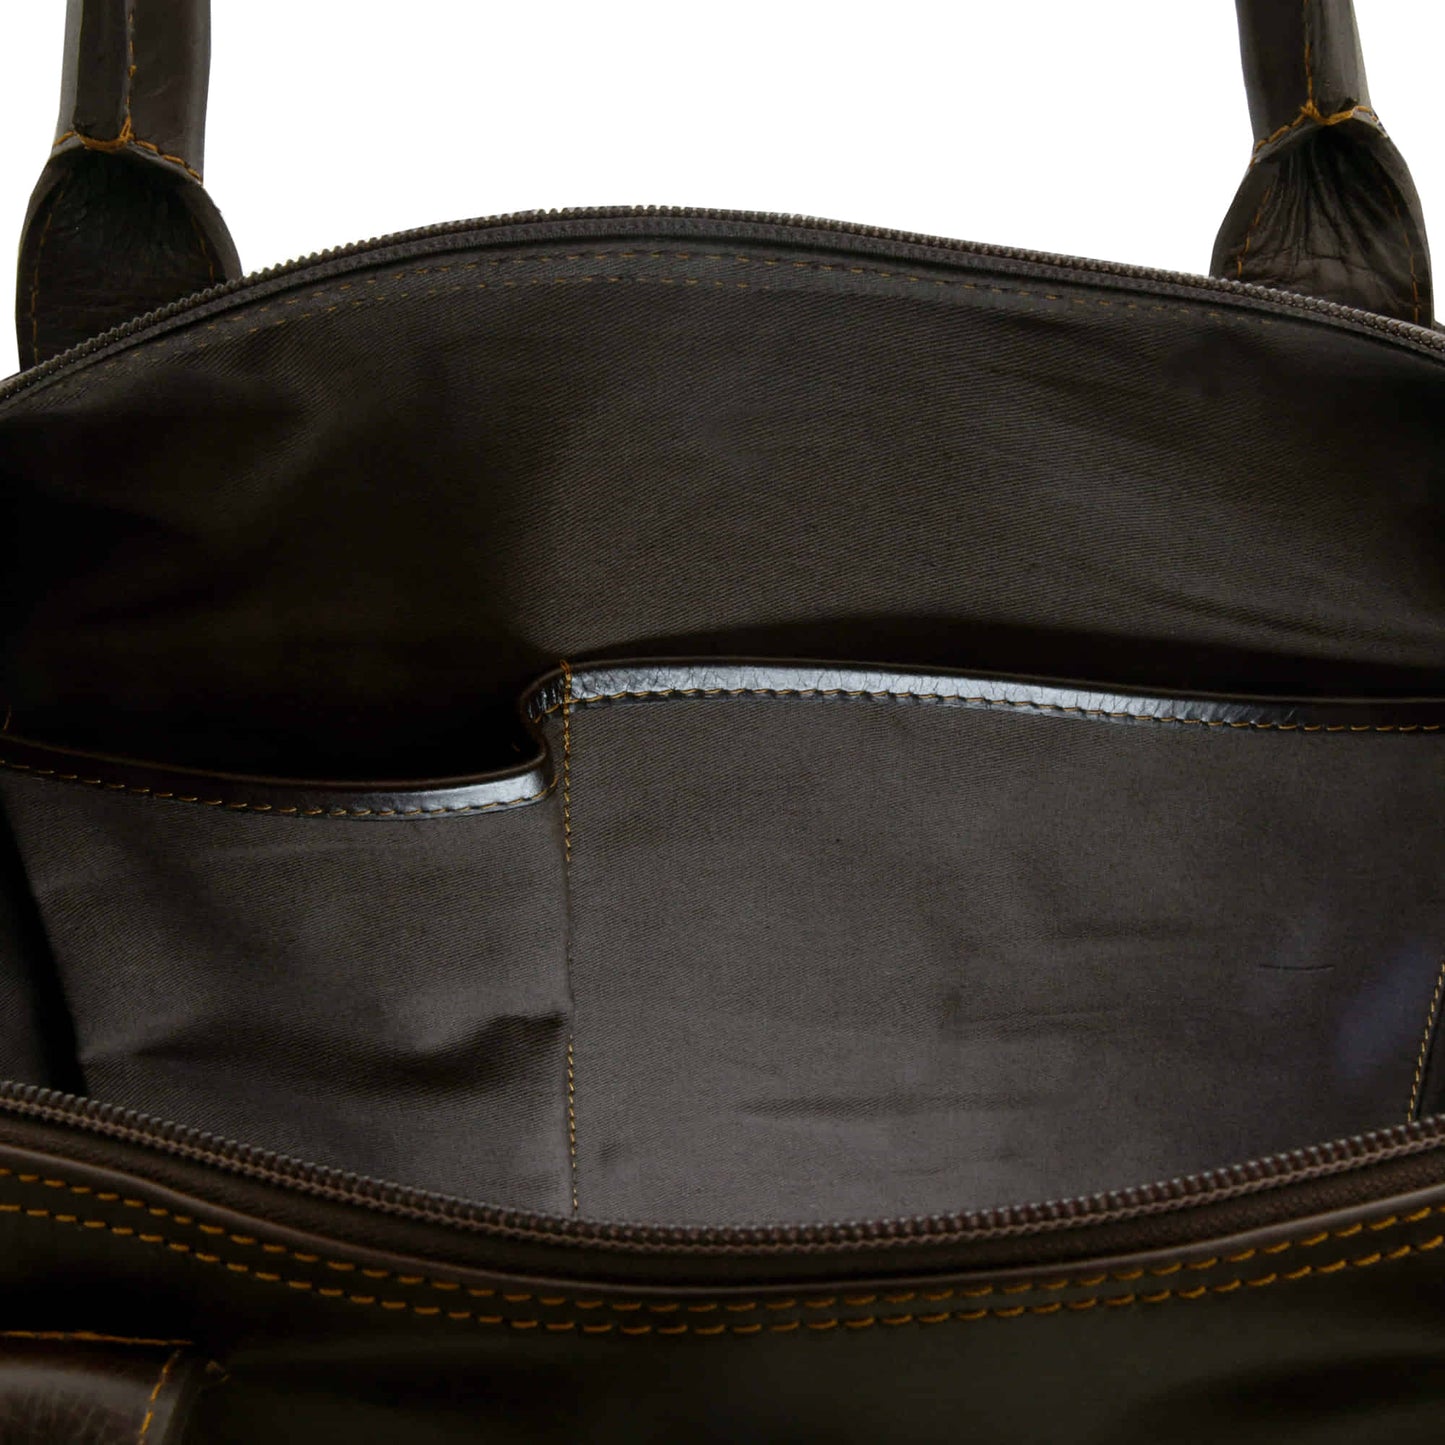 Style n Craft 392100 Large Duffle Bag in Full Grain Dark Brown Leather - Interior View Showing the 2 Interior Open Pockets